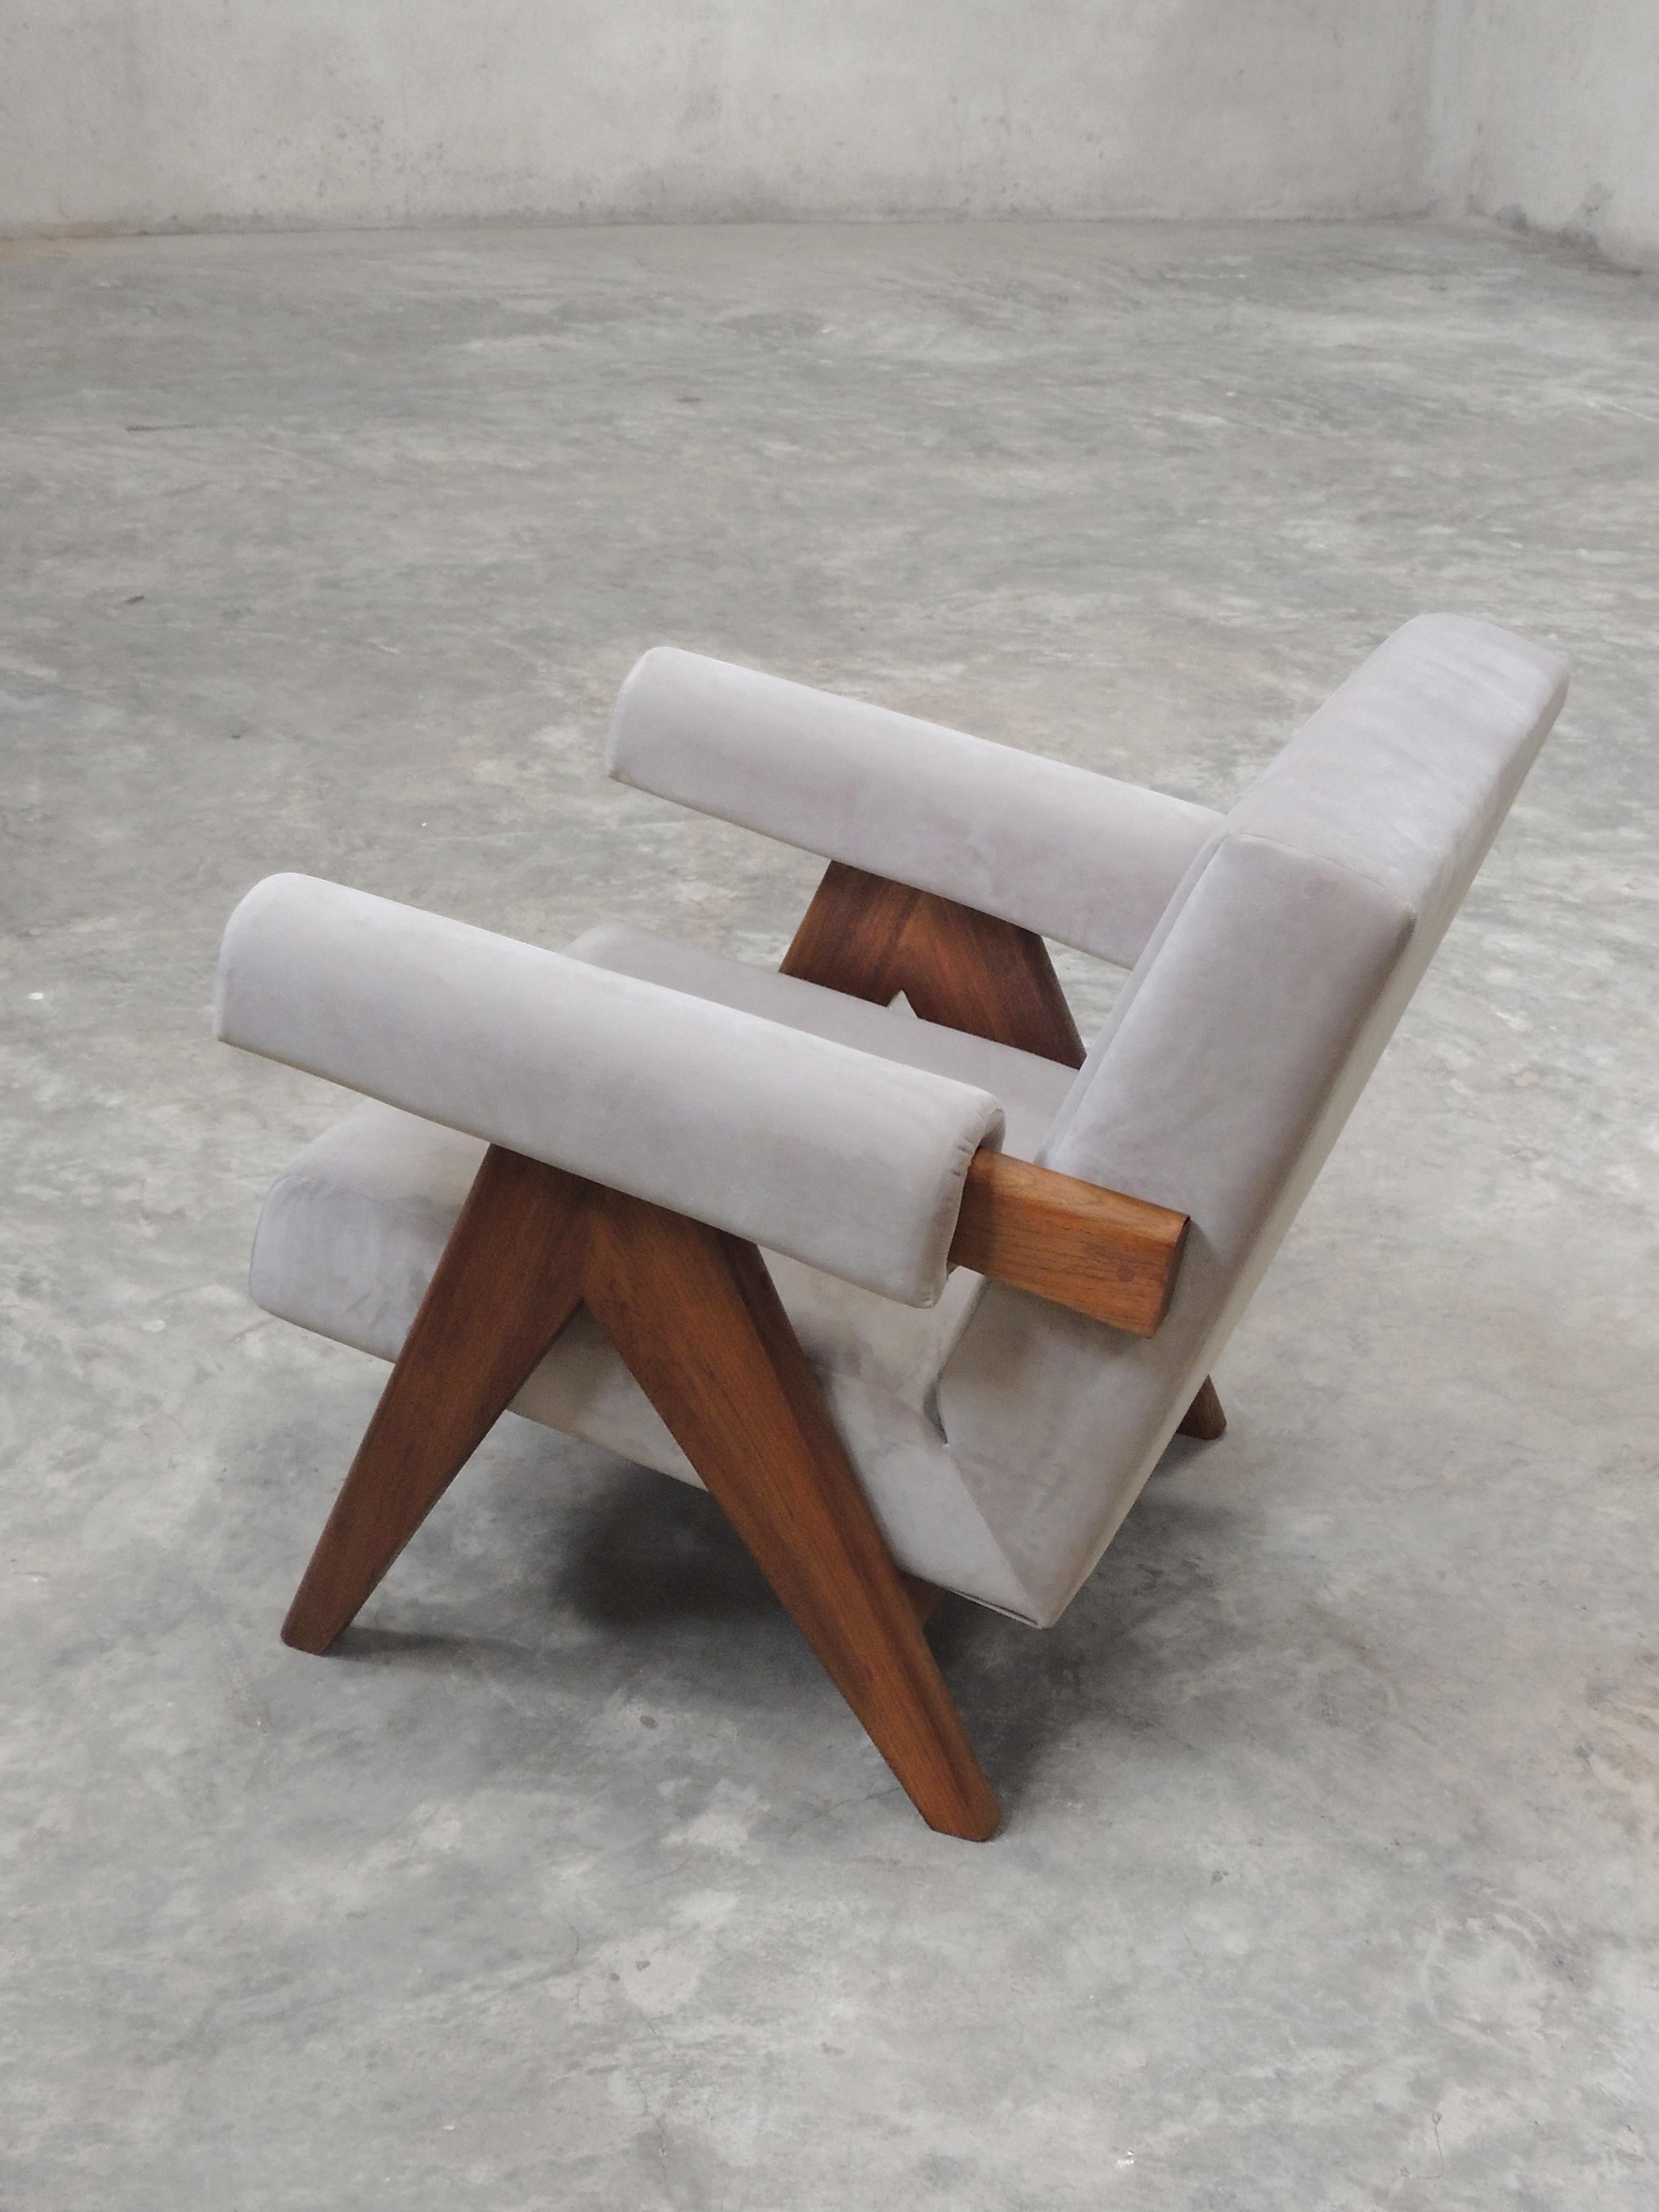 Asian Pierre Jeanneret's Upholstered Armchair, Hand-Sculpted Contemporary Reedition